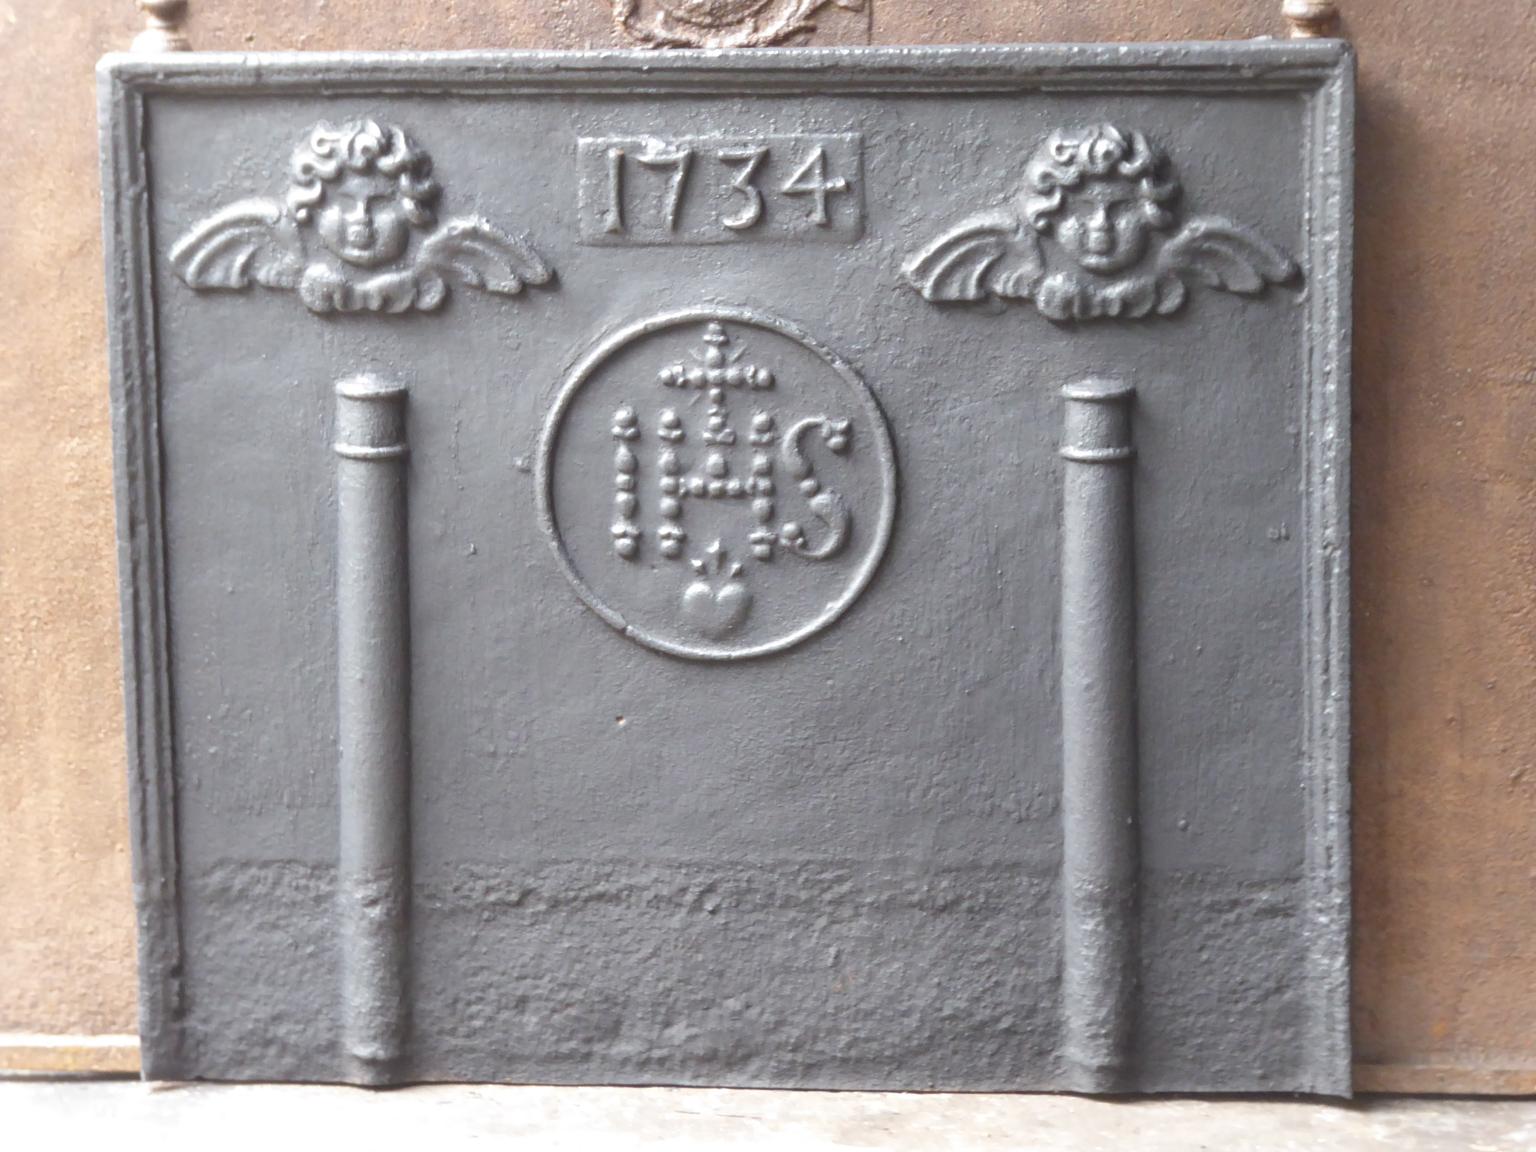 18th century Louis XIV French fireback with pillars, IHS monogram, angels and the date of production 1734.

The monogram IHS stands for Iesus Hominum Salvator (Jesus the Savior of Humanity) or In Hoc Signo (In this sign will you win). The pillars